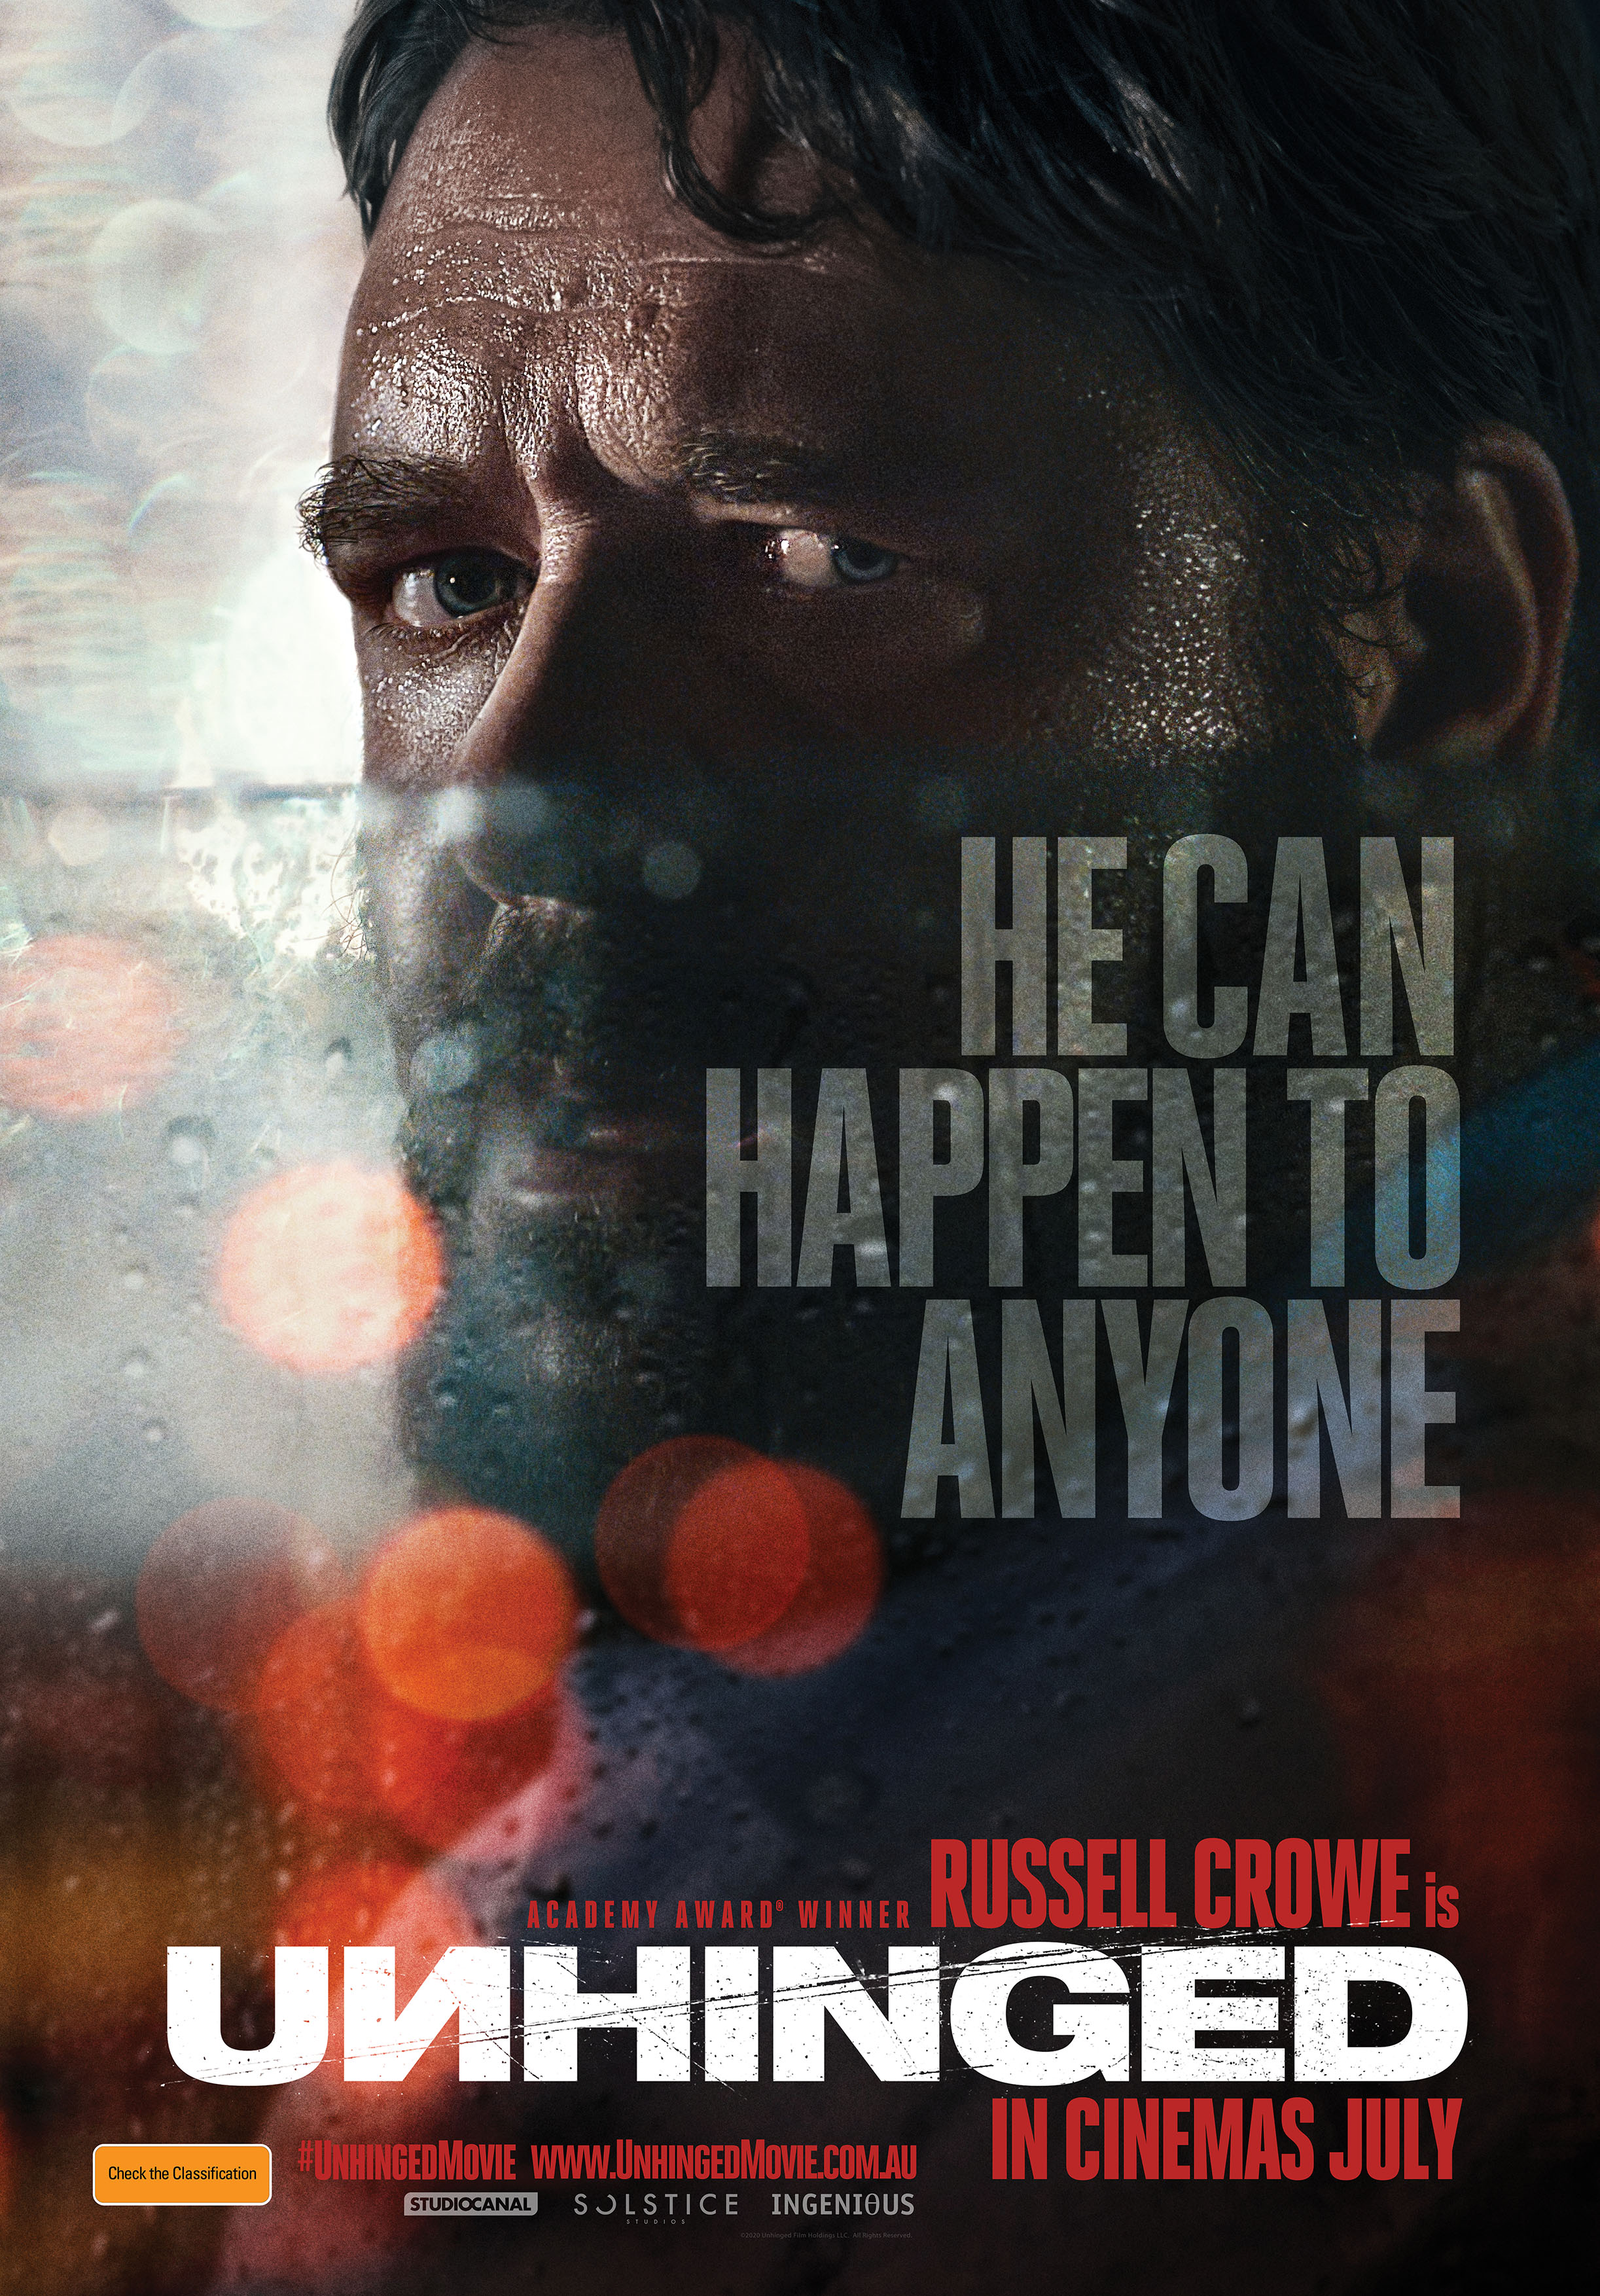 If You Love Thrillers You’ll Be Obsessed with Russell Crowe’s New Film